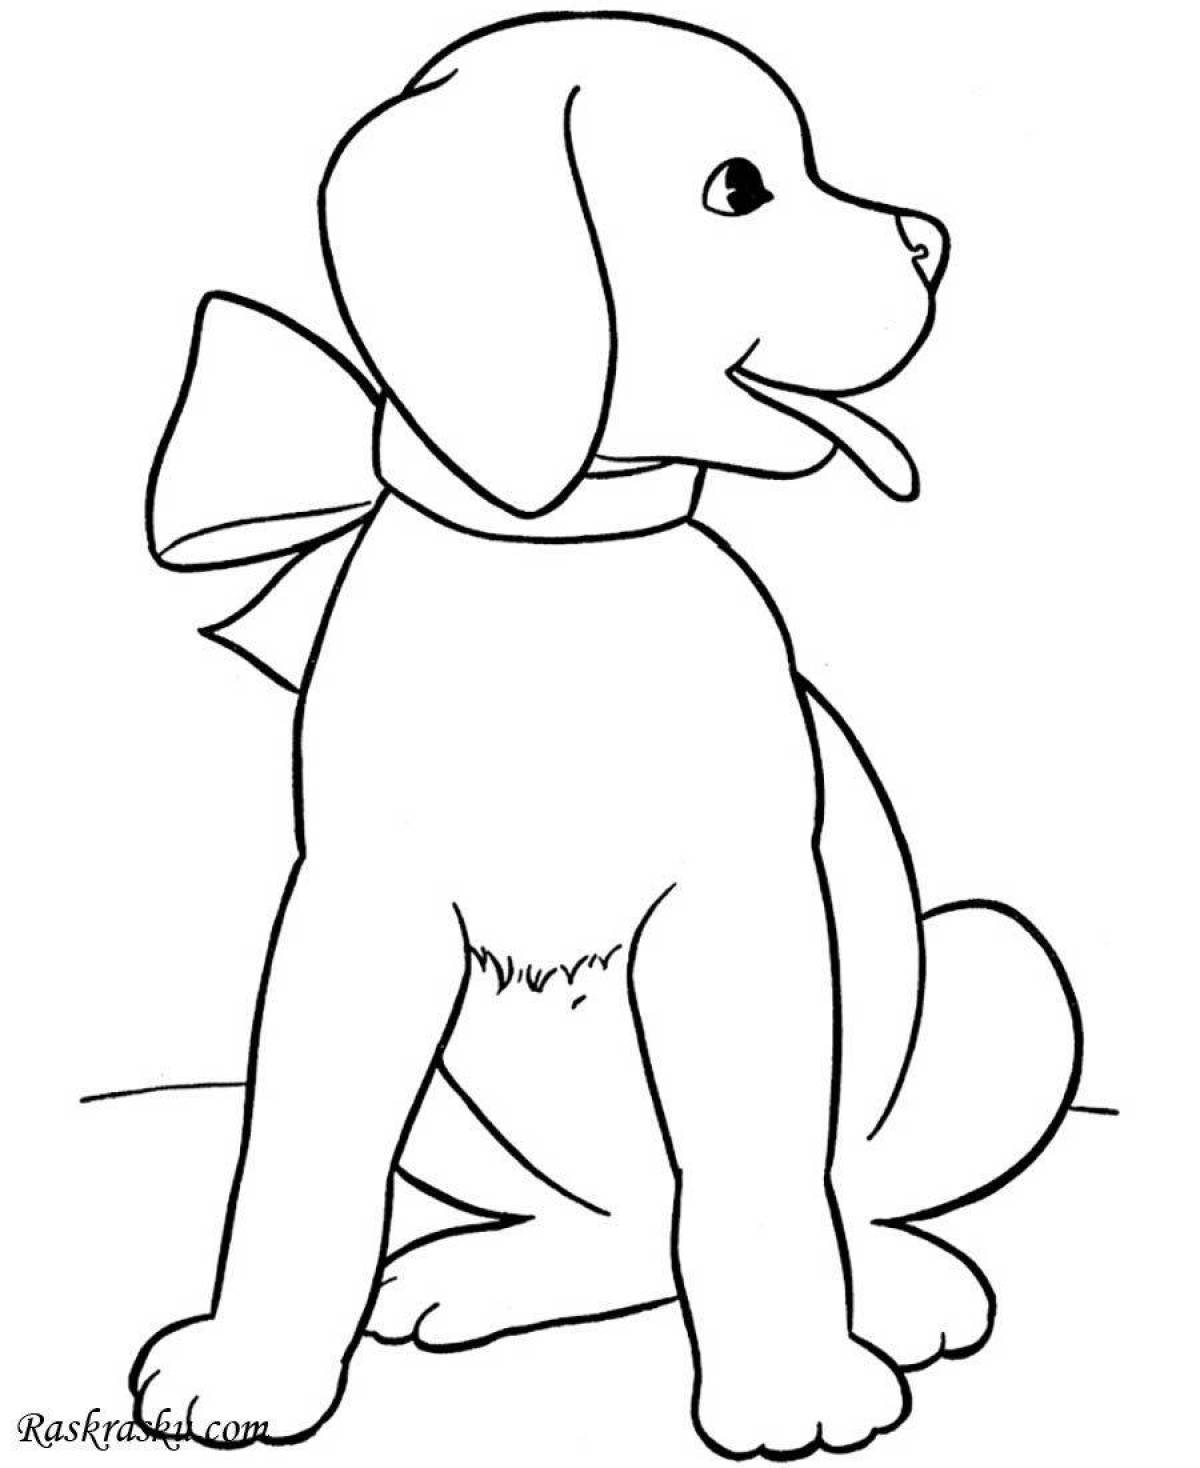 Coloring dog for kids